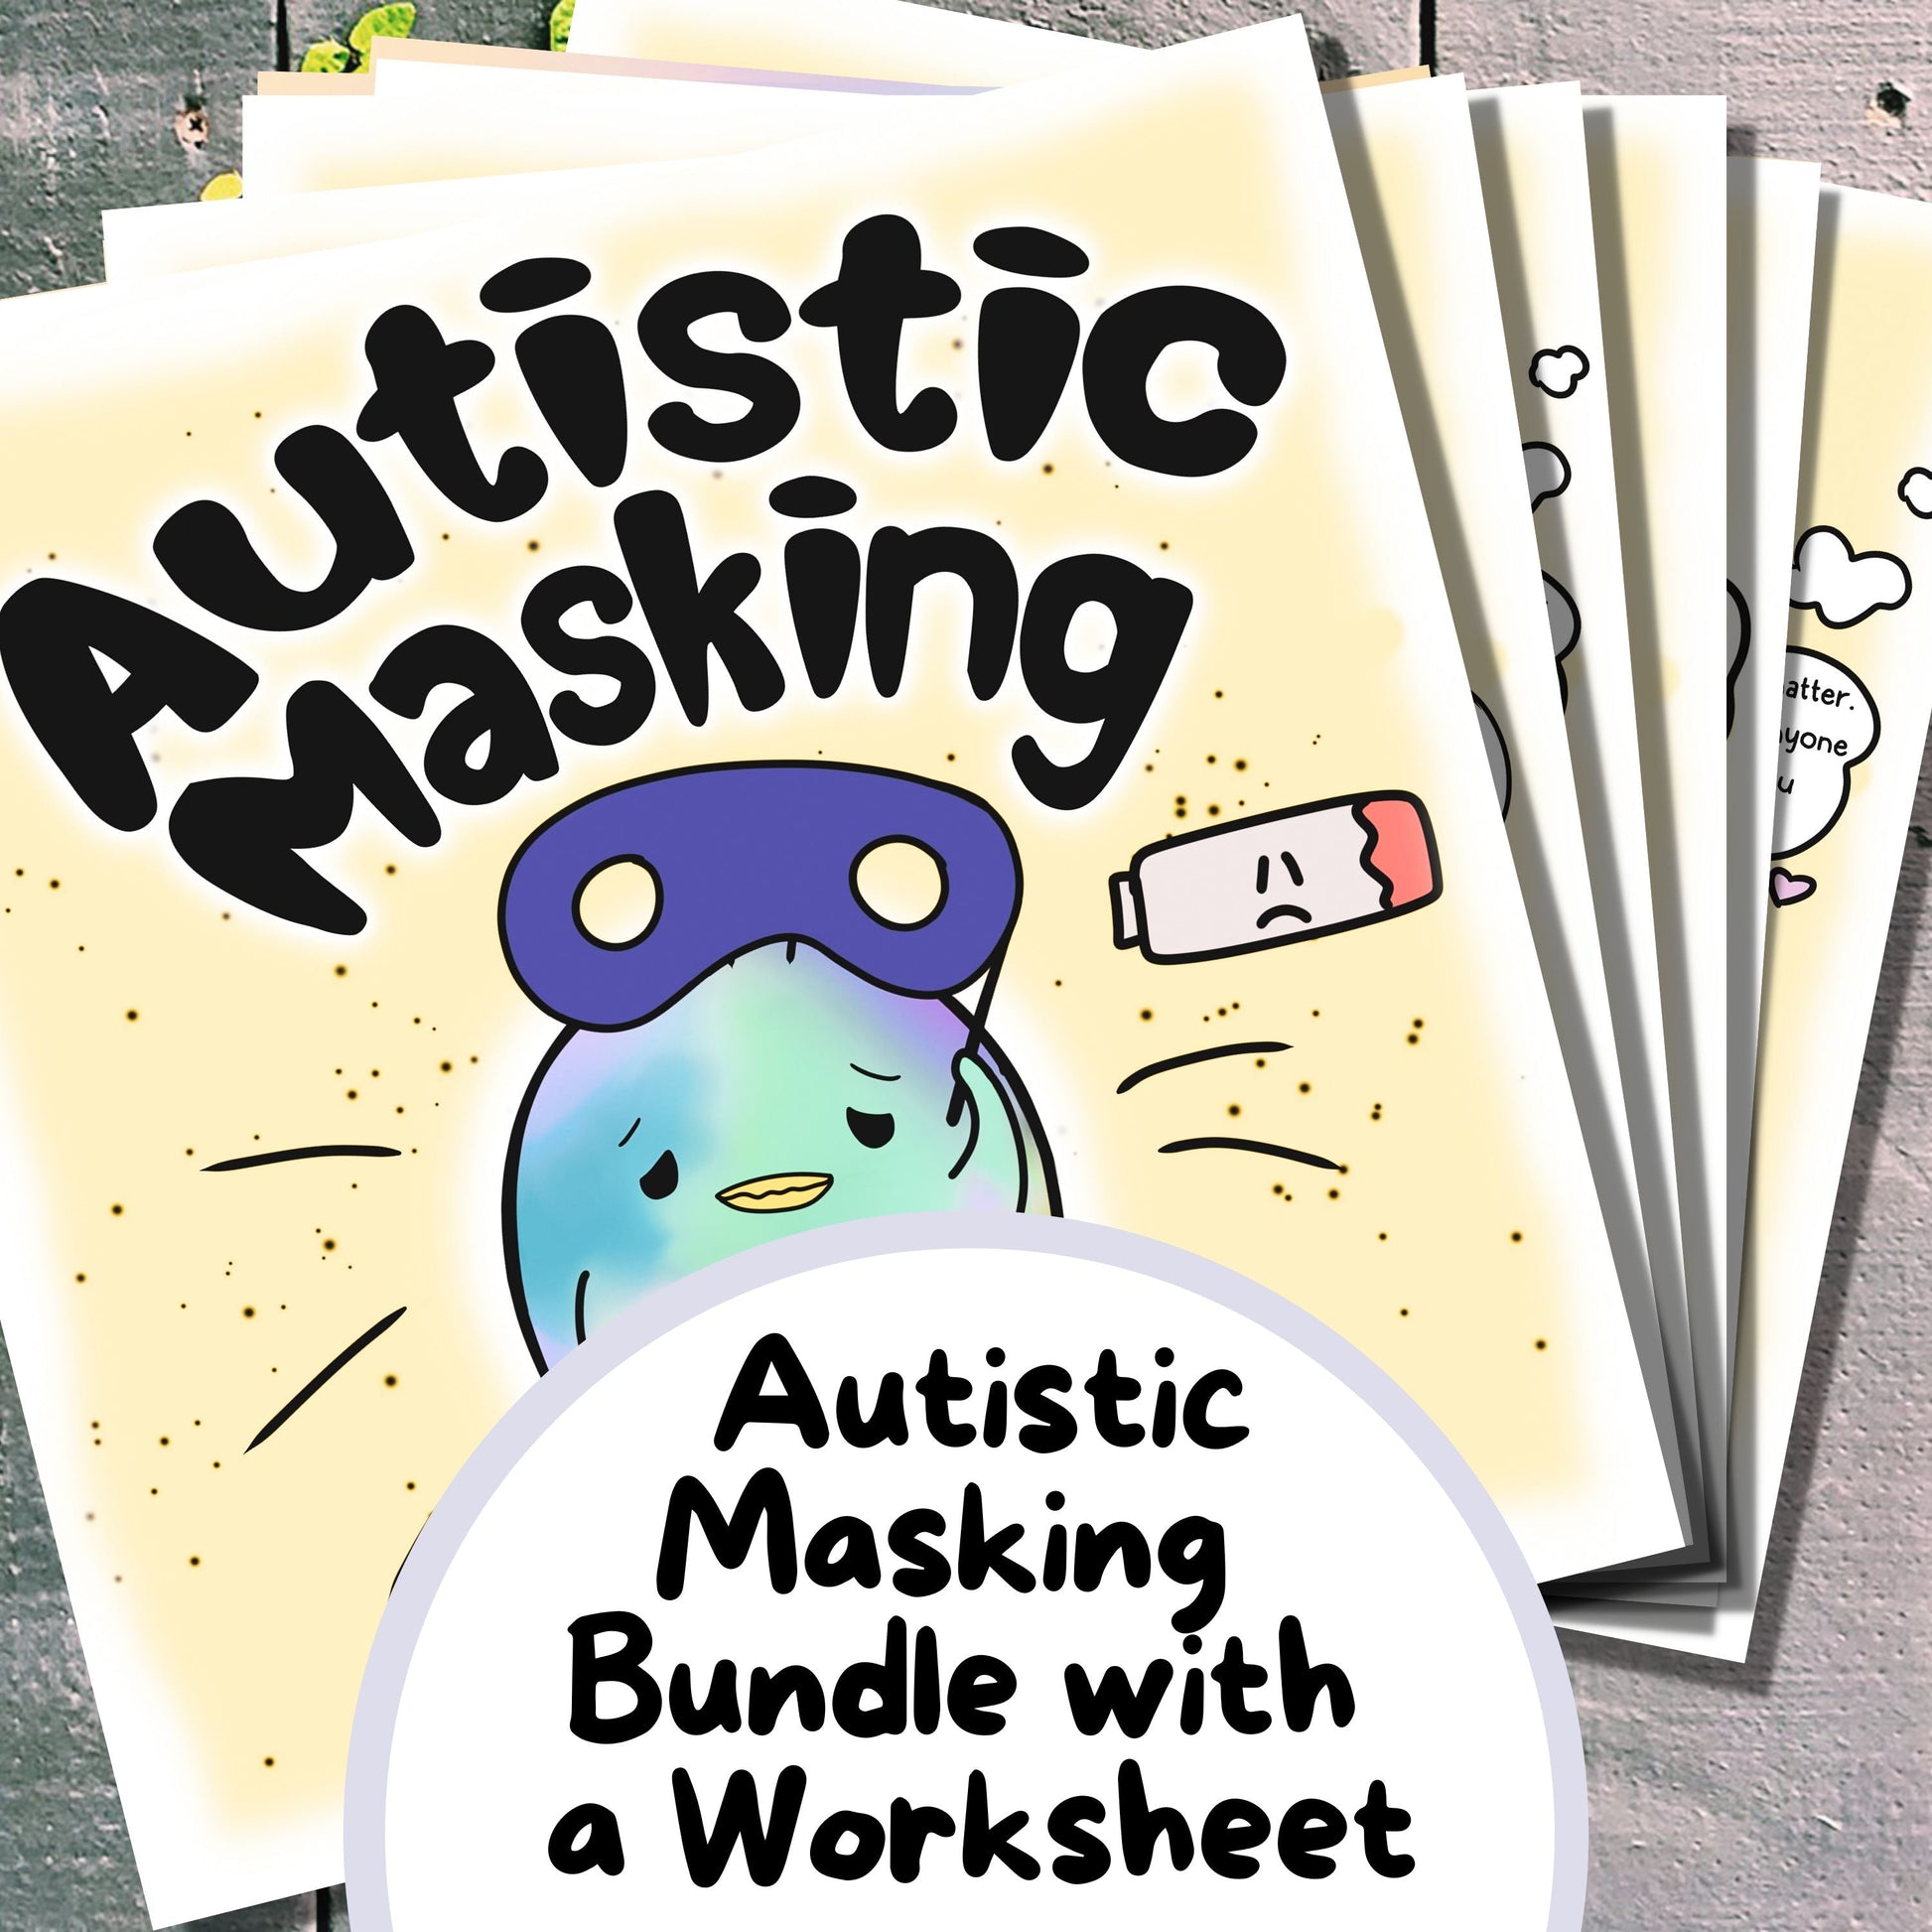 Autistic Masking digital bundle with a blank worksheet. Hand drawn by an autistic artist (LiL Penguin Studios)